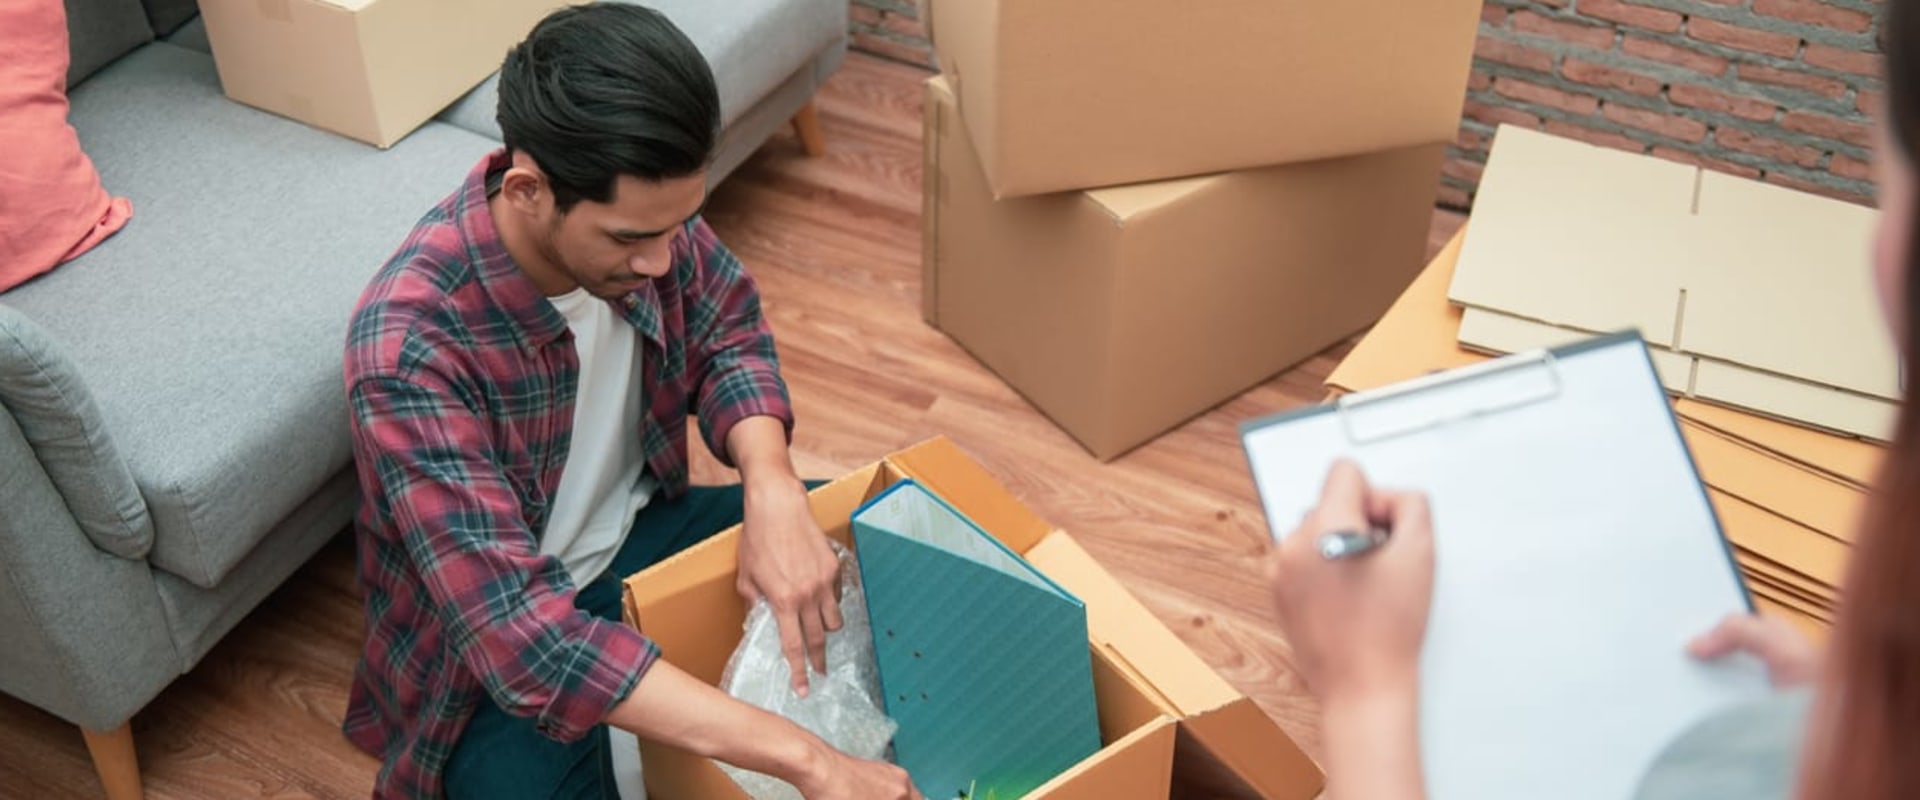 Hiring Professional Movers vs. DIY Moving: Which Option is Best for You?